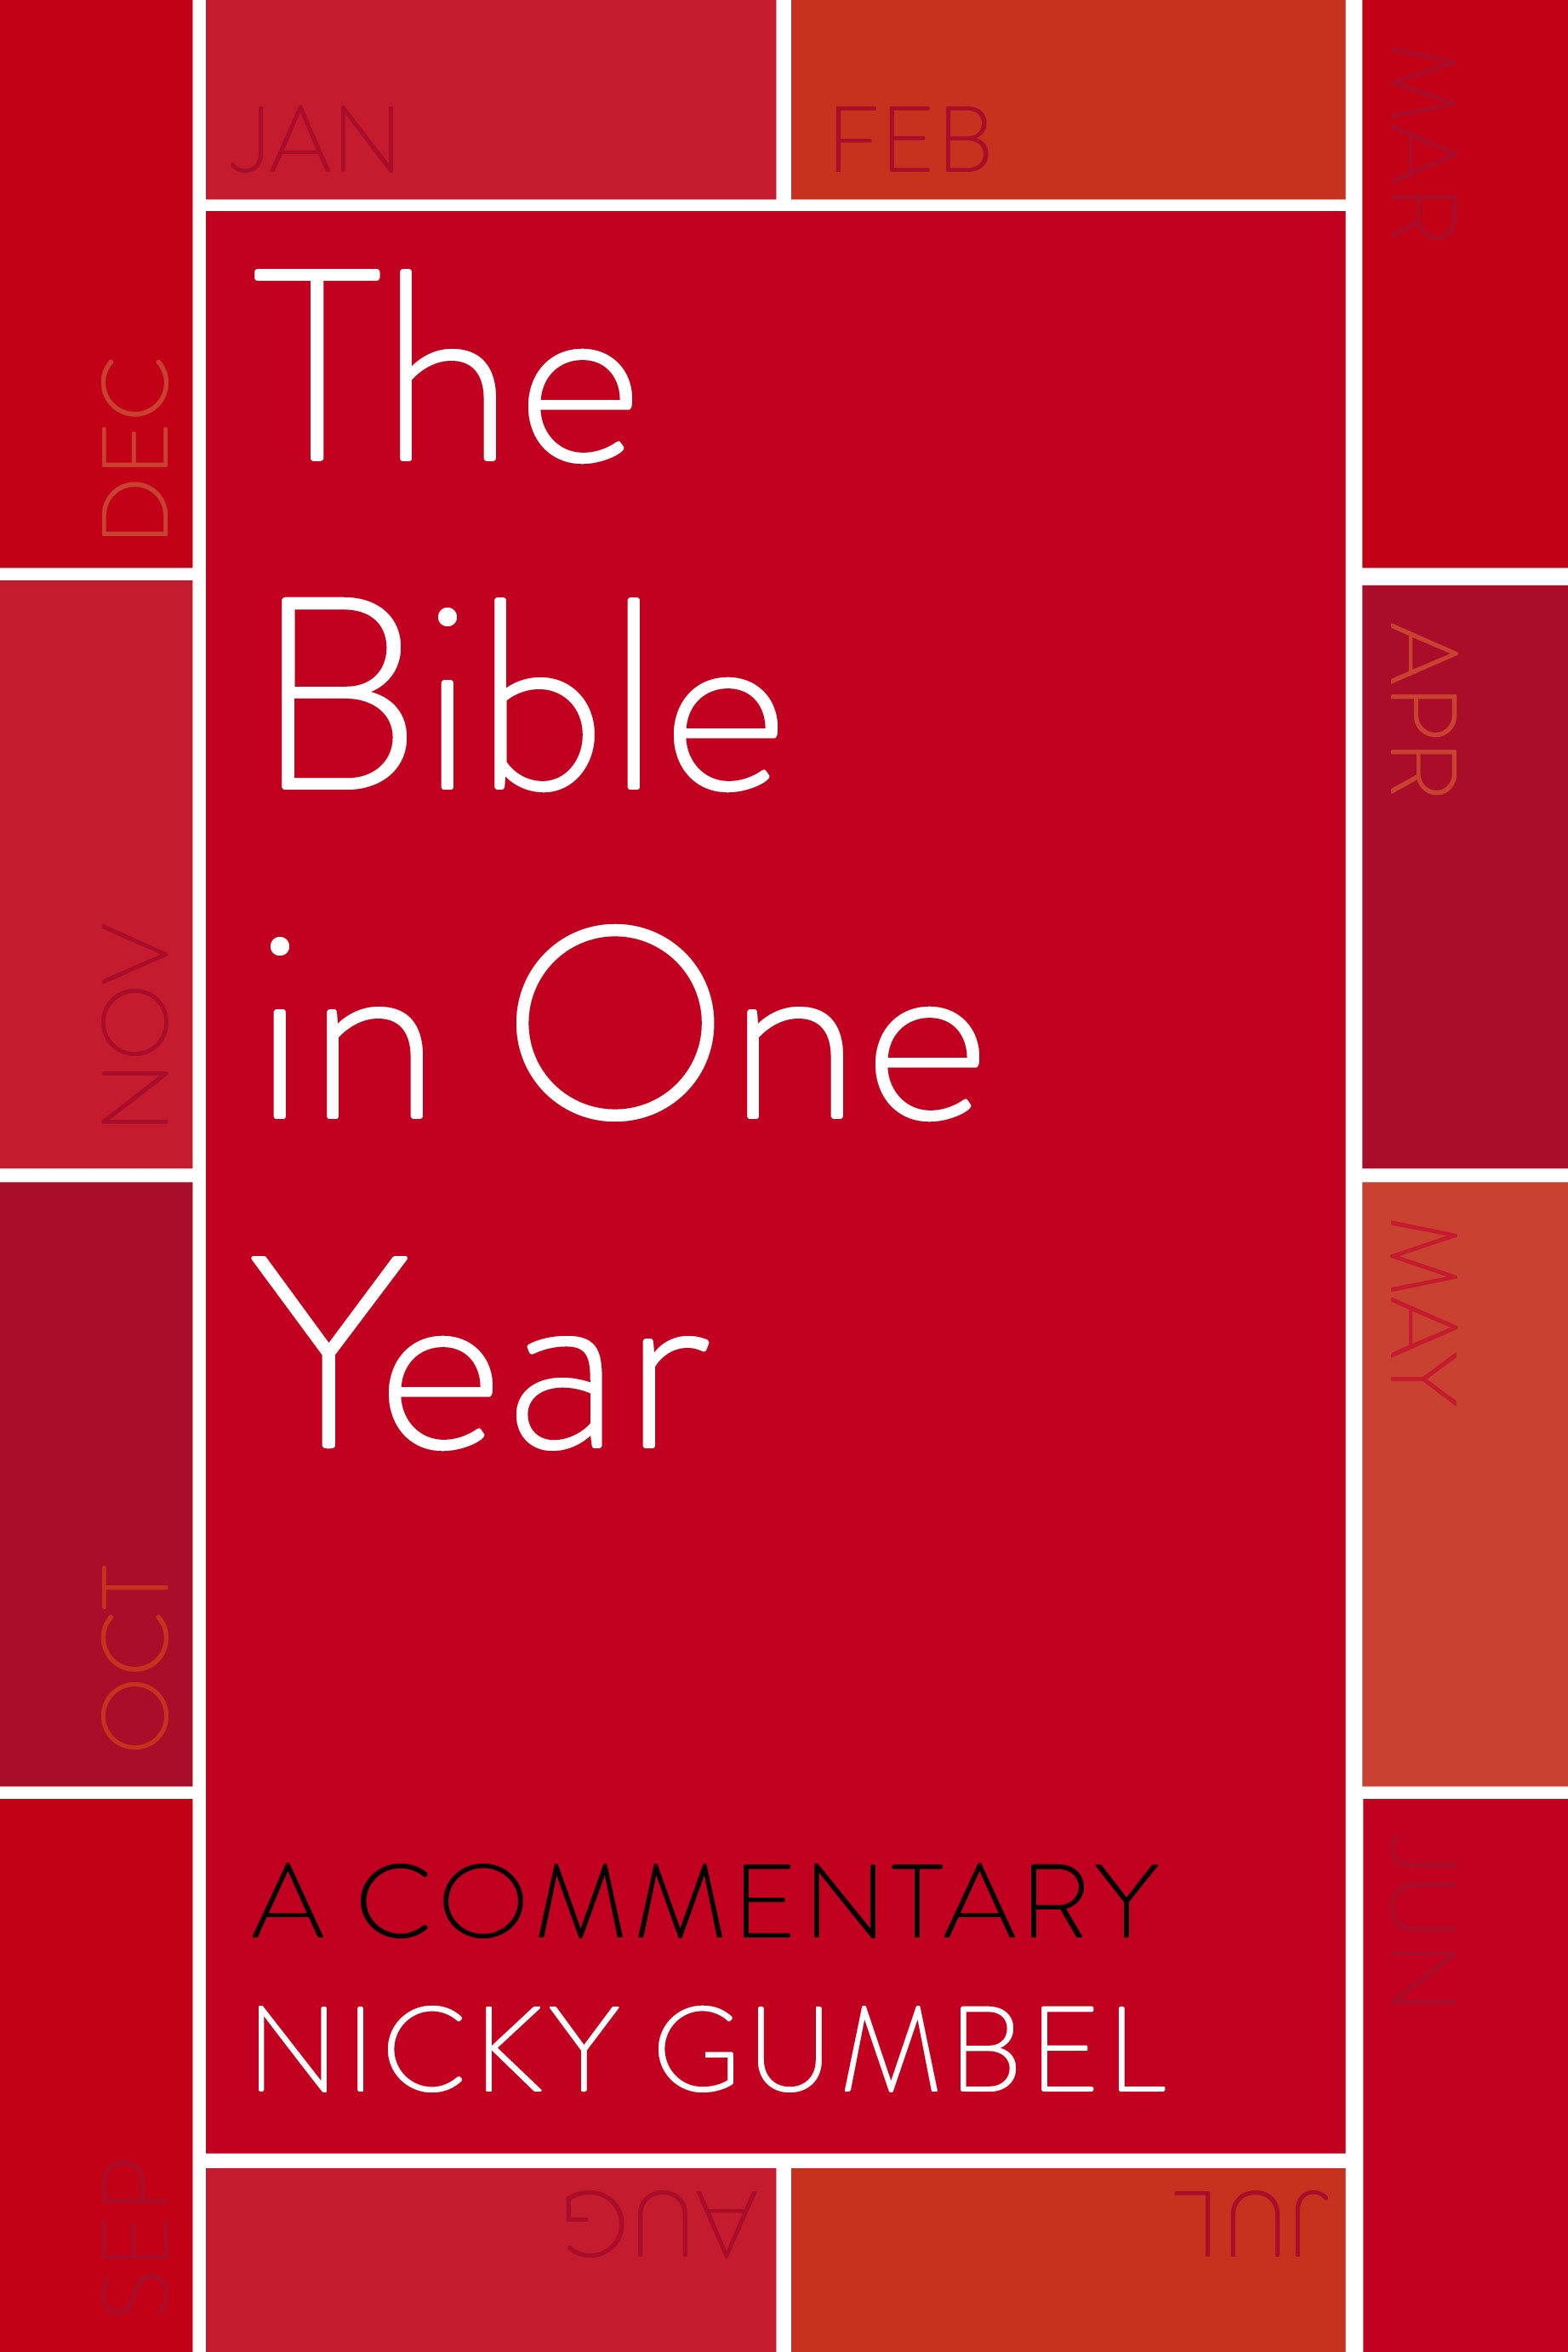 The Bible in One Year – a Commentary by Nicky Gumbel by Nicky Gumbel